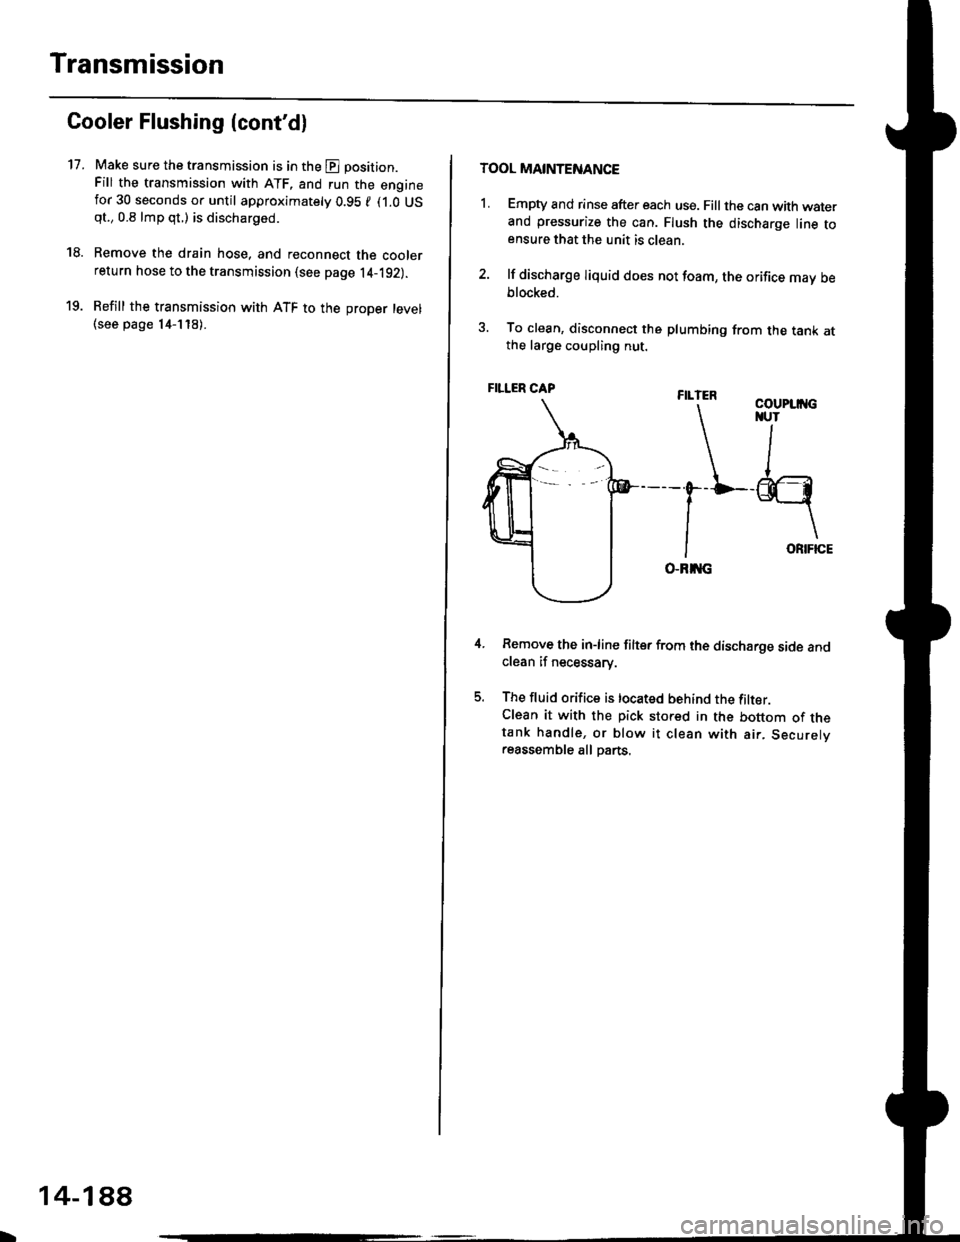 HONDA CIVIC 1999 6.G User Guide Transmission
17.
Cooler Flushing (contdl
Make sure the transmission is in the E position.
Fill the transmission with ATF, and run the enginefor 30 seconds or until approximately 0.95 f (1.0 USqt.,0.8